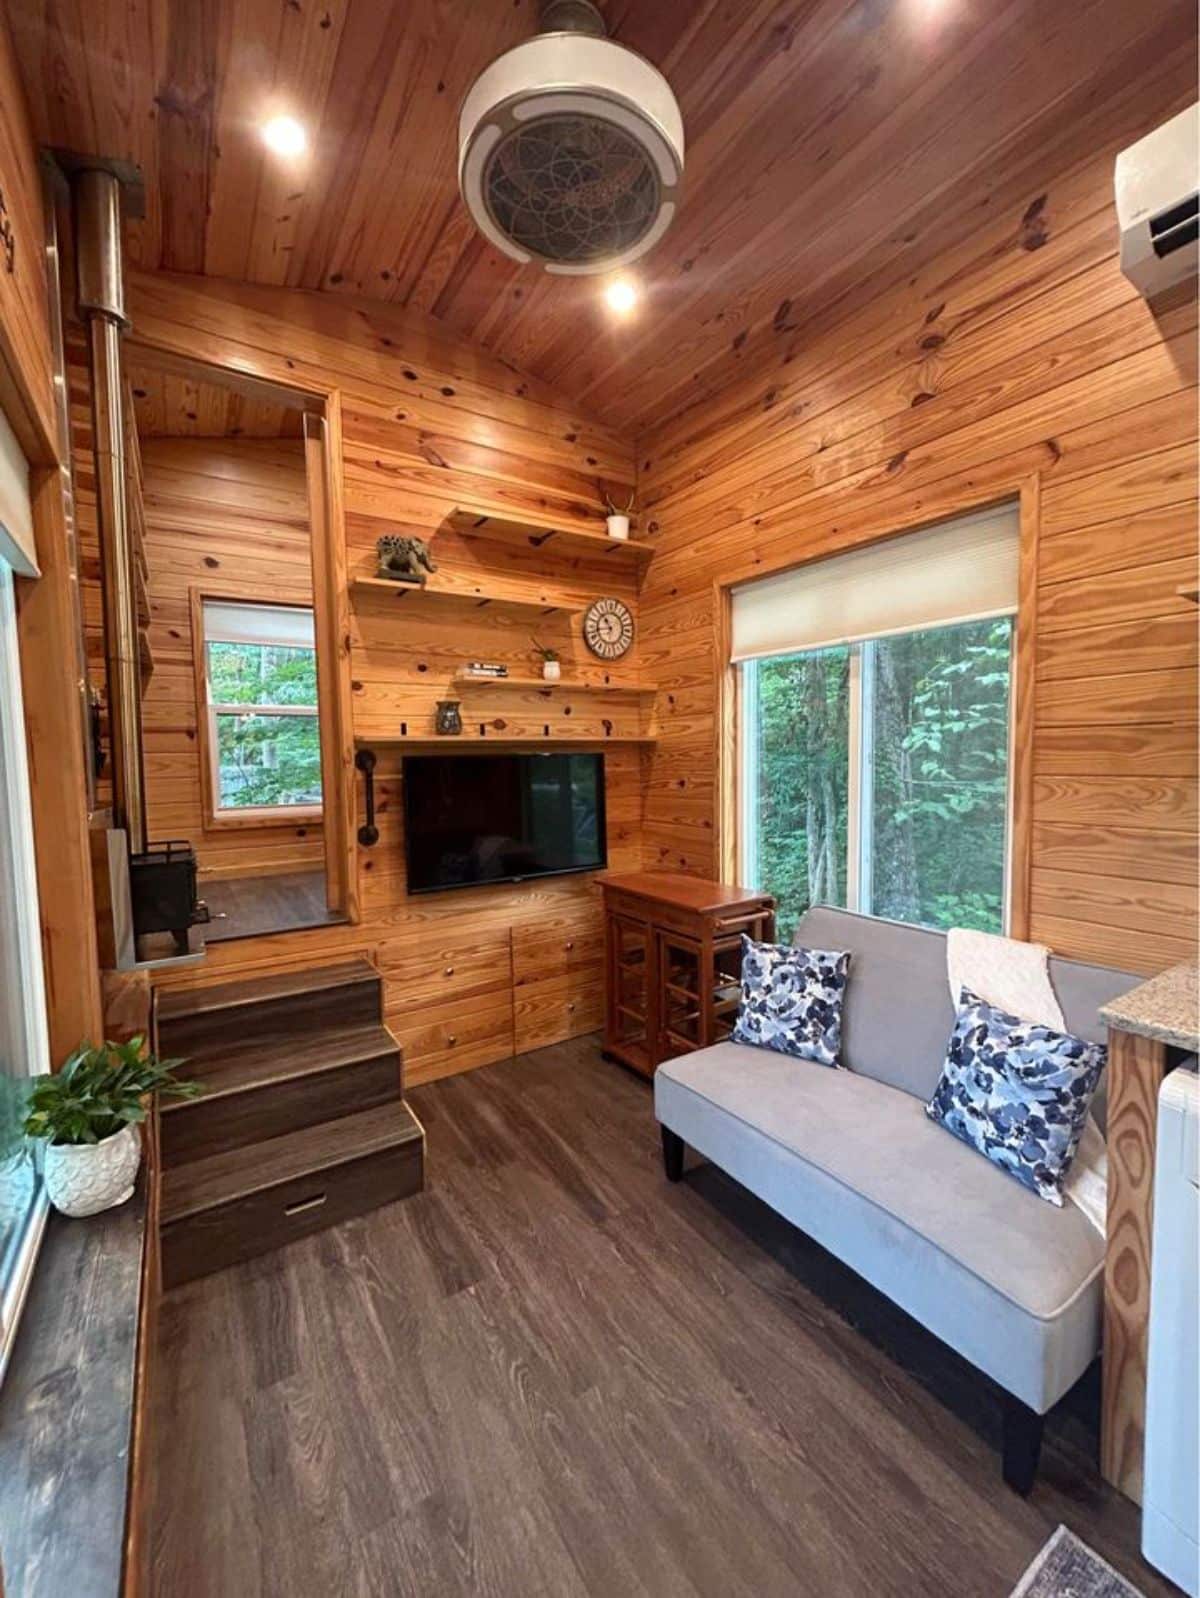 living area of 26’ custom tiny home has a couch, side table and wall mounted TV set